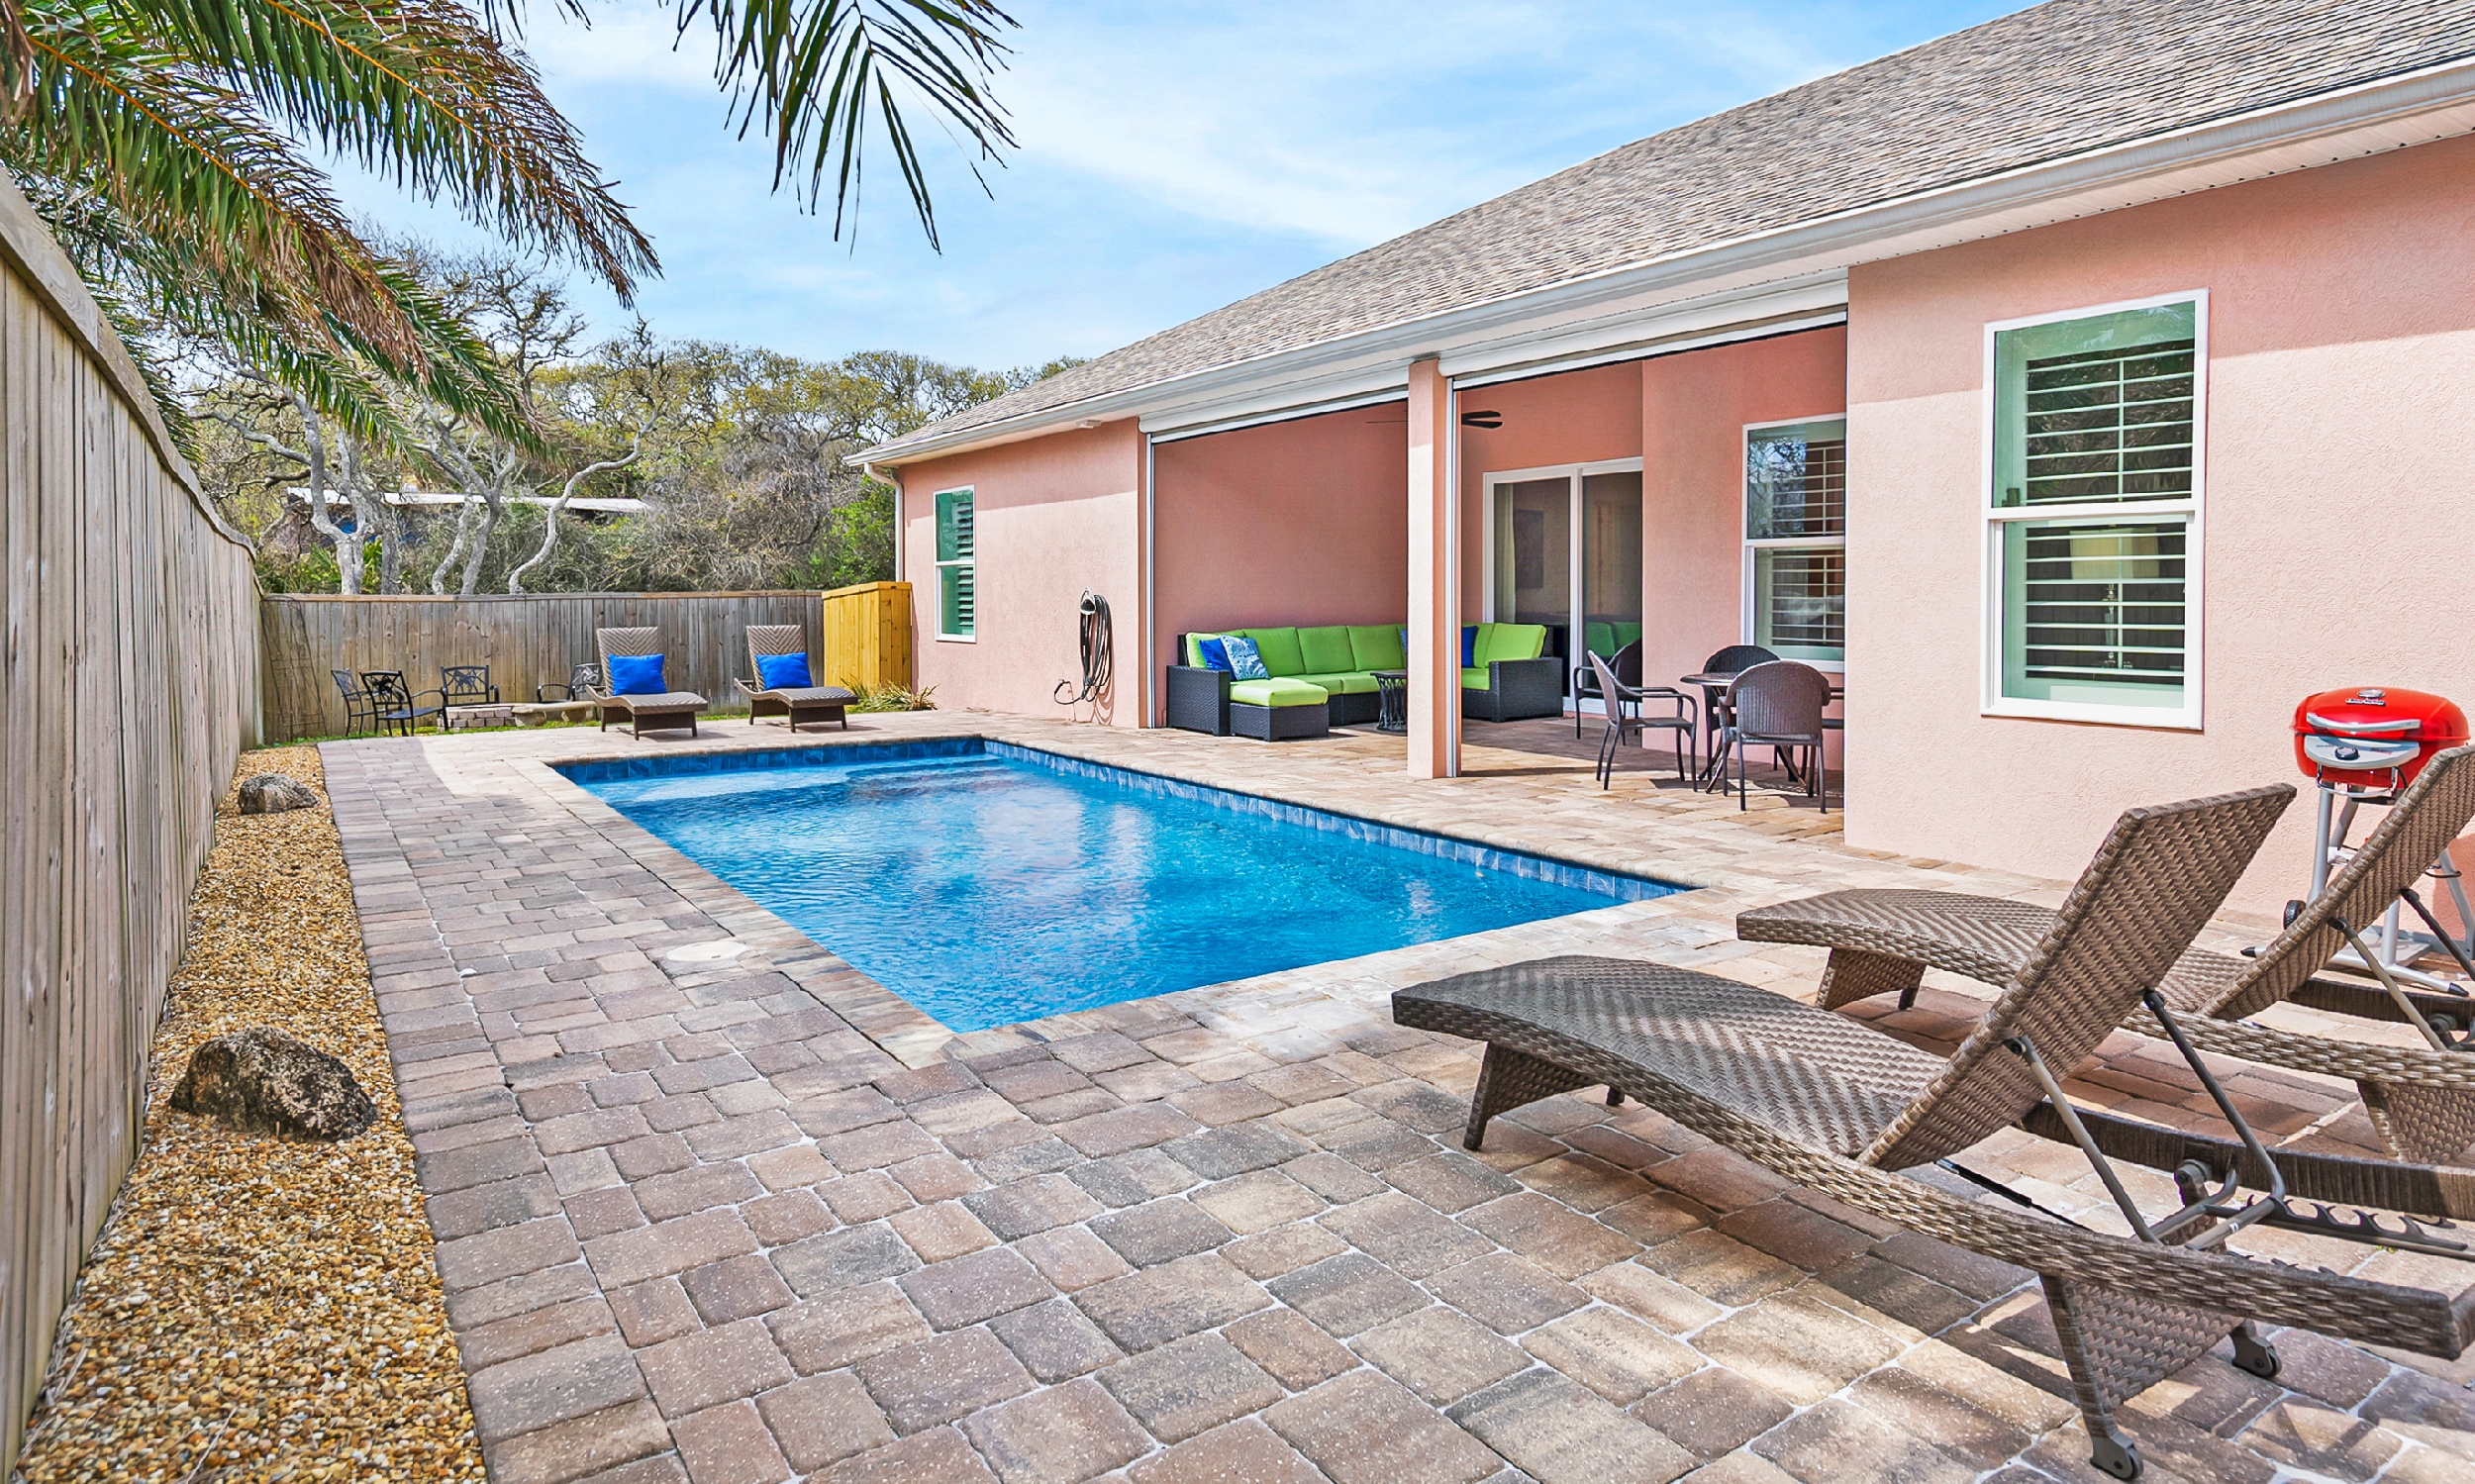 This pink vacation home has a private yard and a pool and deck